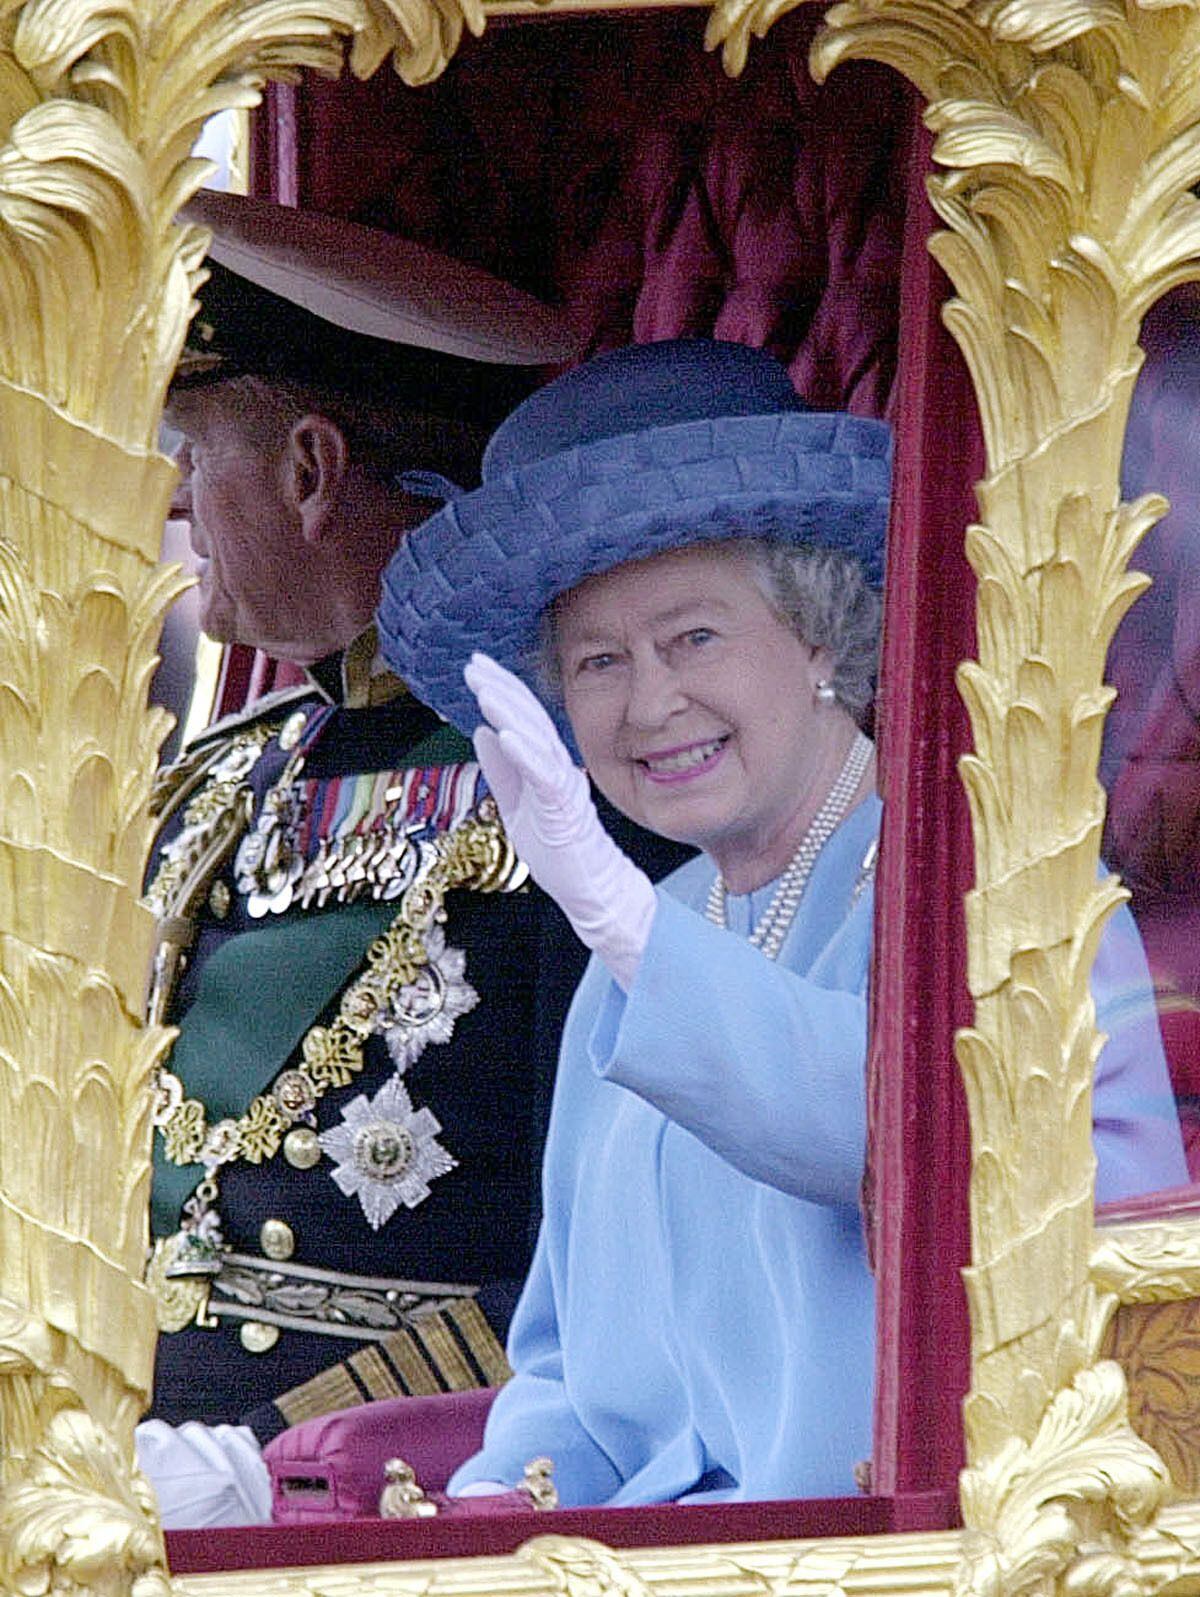 Britain's Queen Elizabeth II used the coach during the 2002 Golden Jubilee